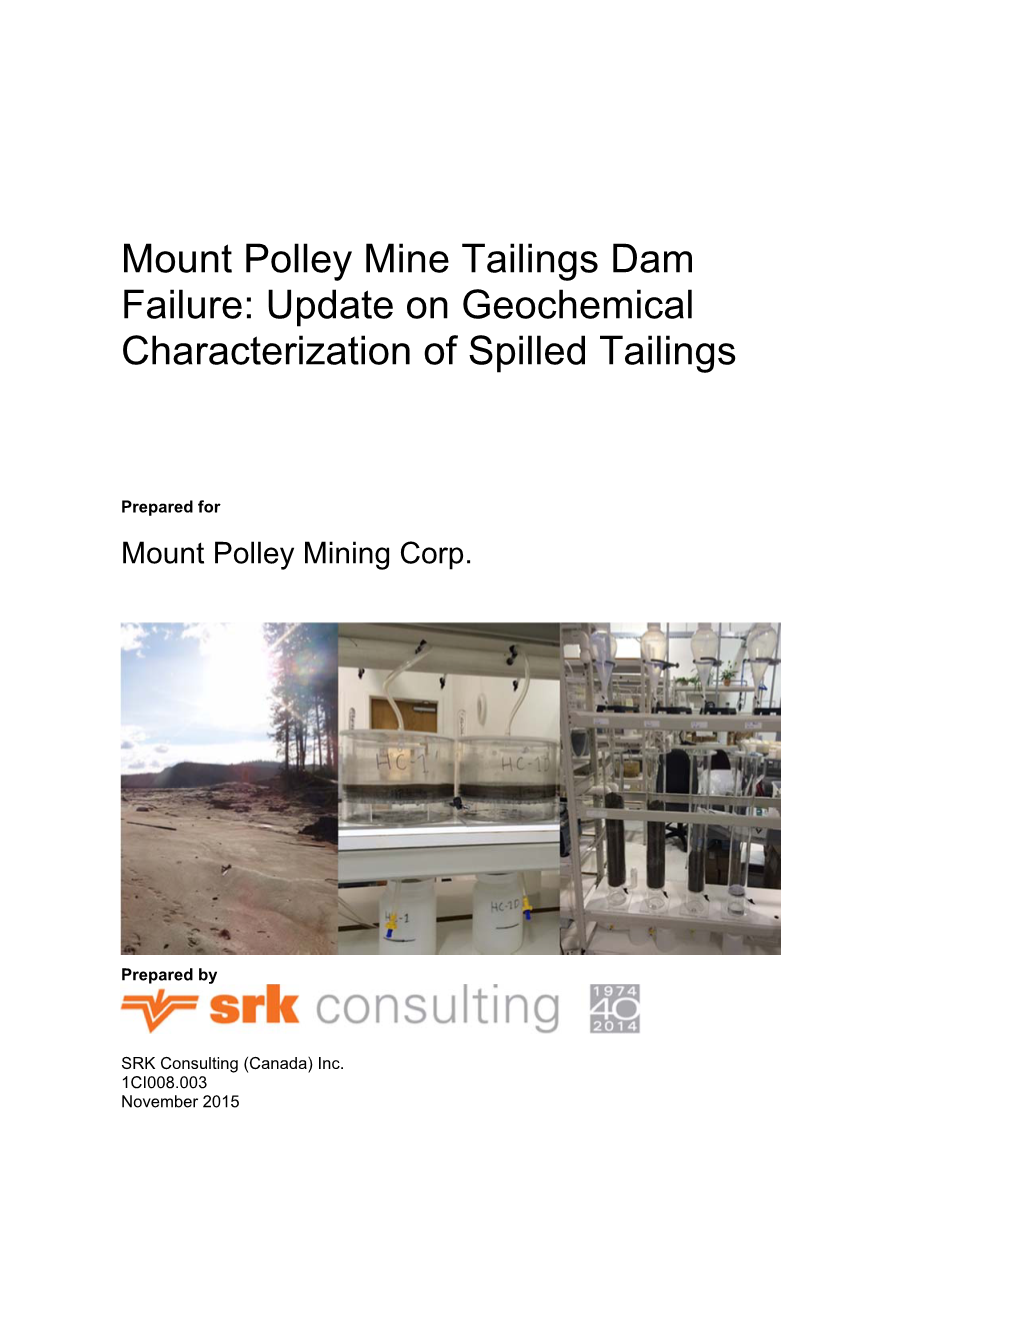 Mount Polley Mine Tailings Dam Failure: Update on Geochemical Characterization of Spilled Tailings